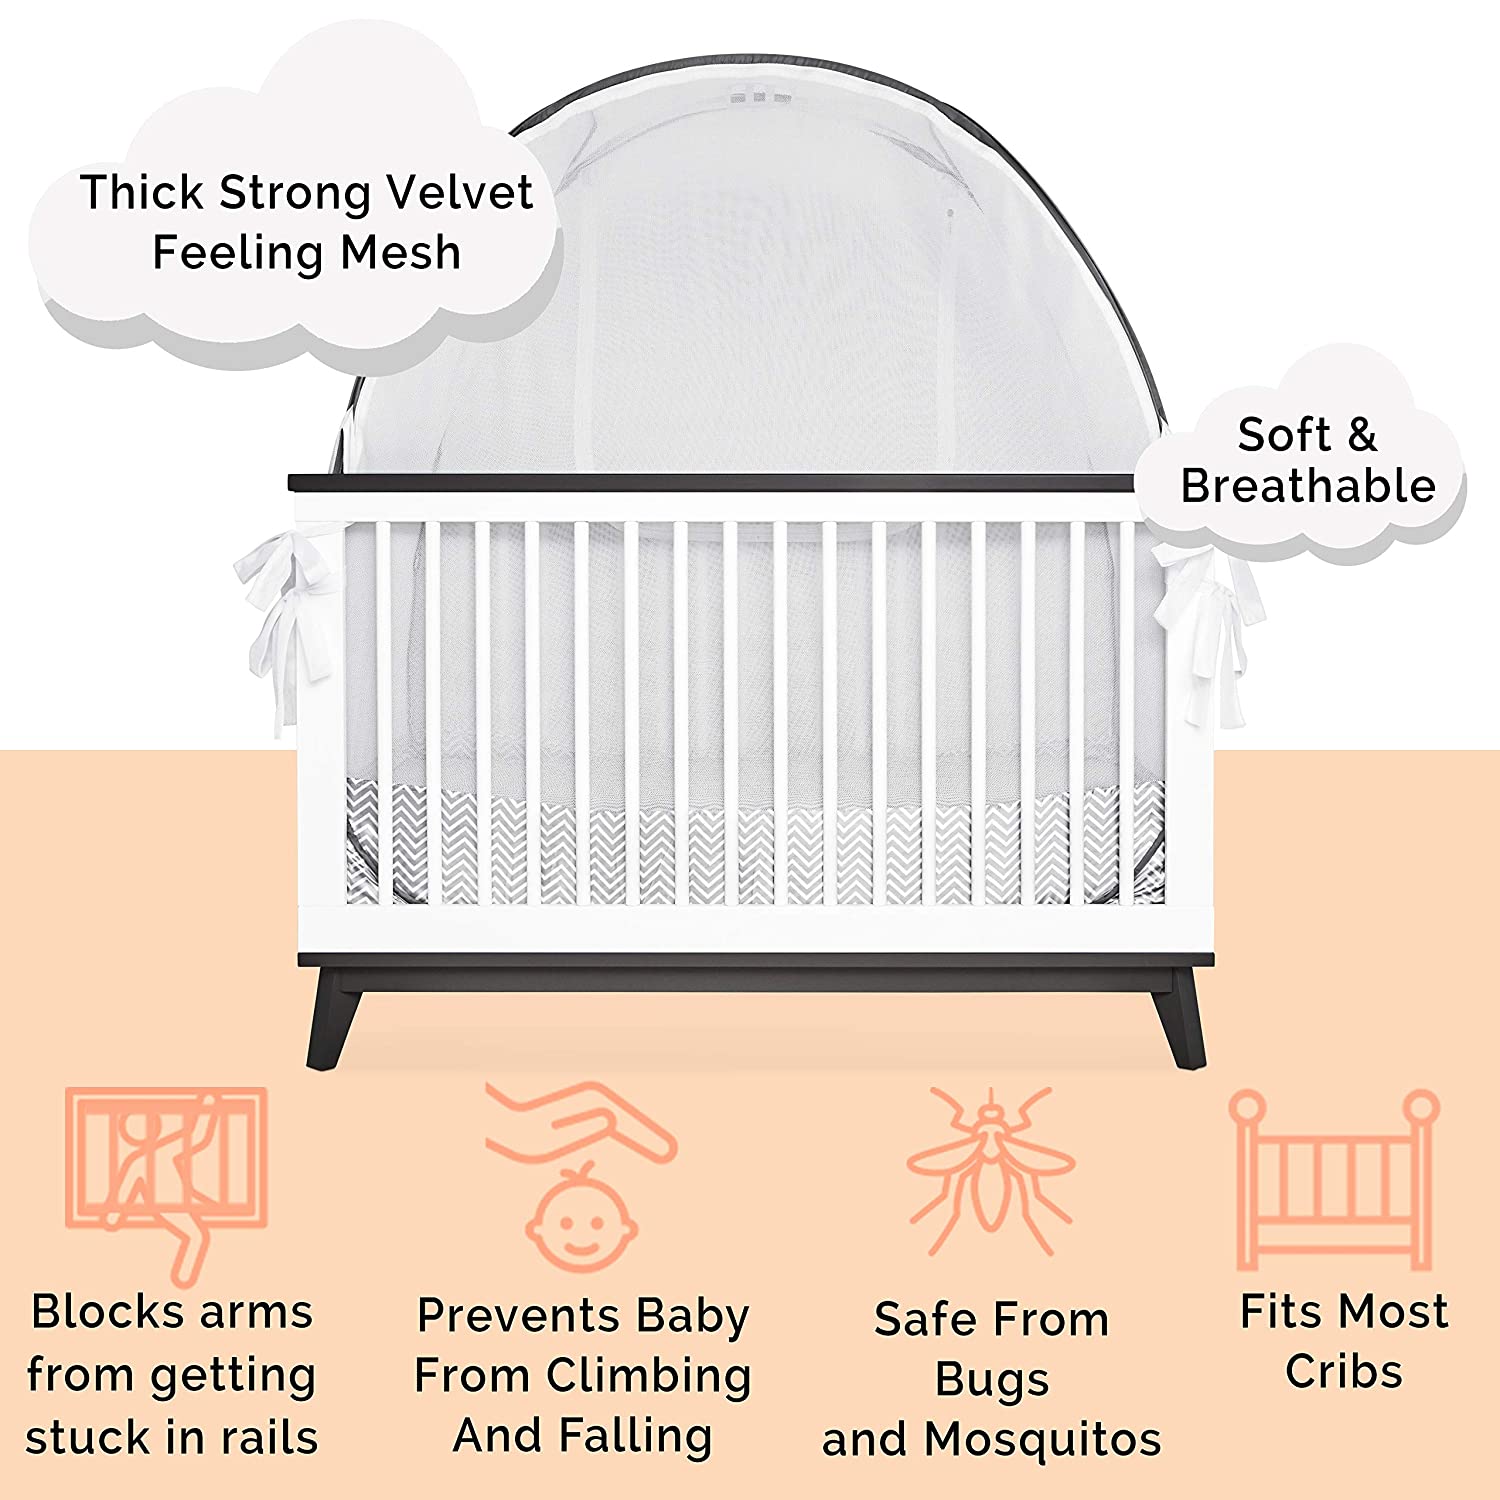 Baby Safety Crib Bed Canopy Cover Infant Pop-Up-Zelte mit Sichtfenster